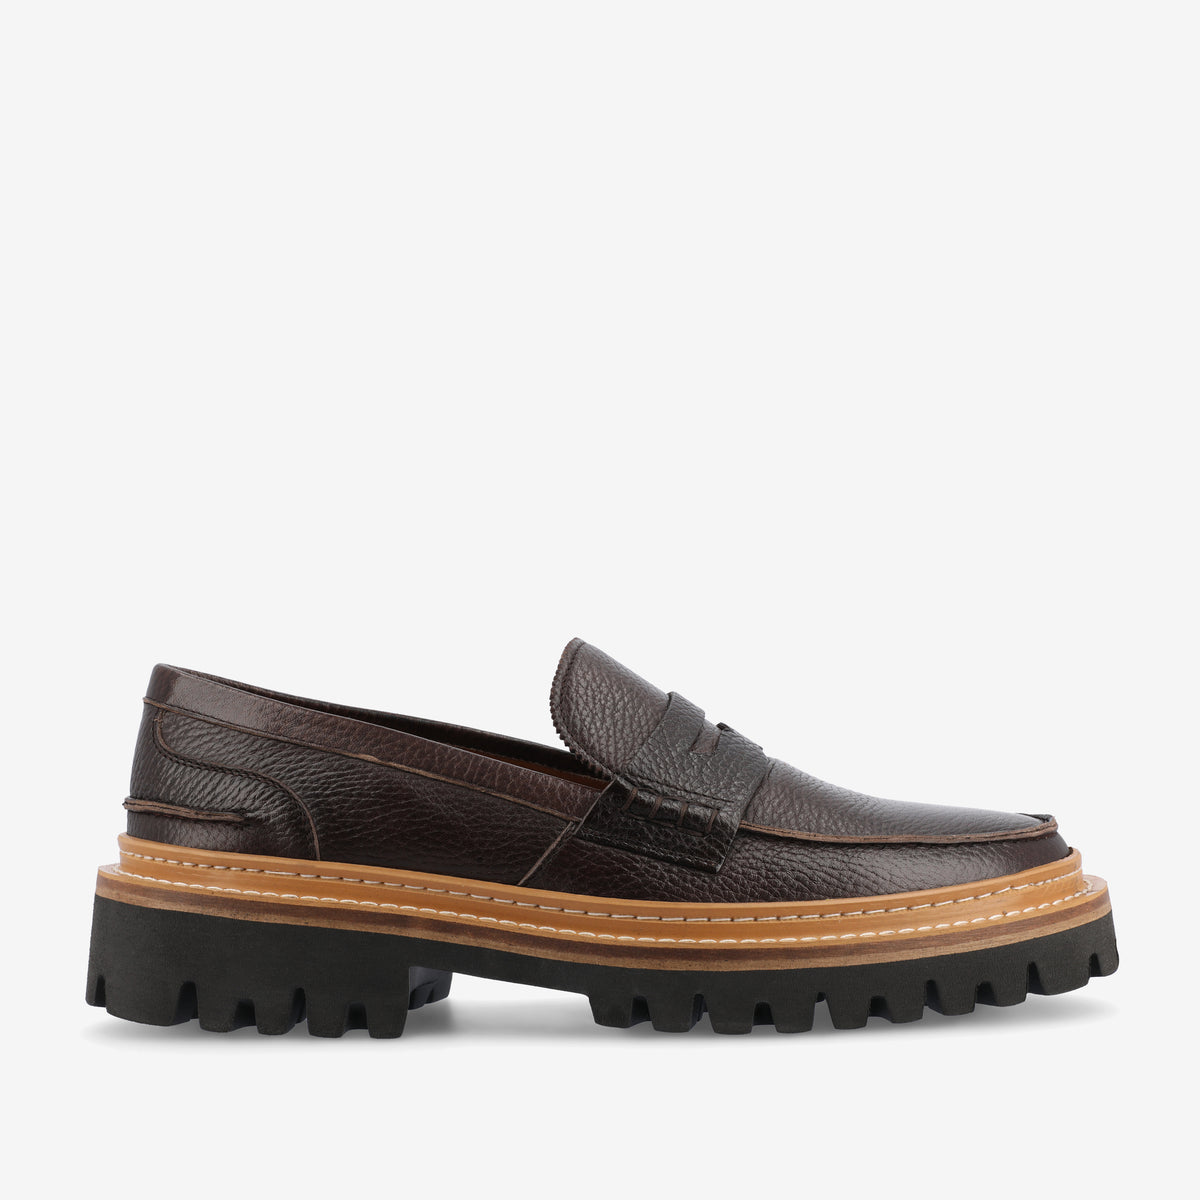 The Country Loafer in Coffee (Last Chance, Final Sale)